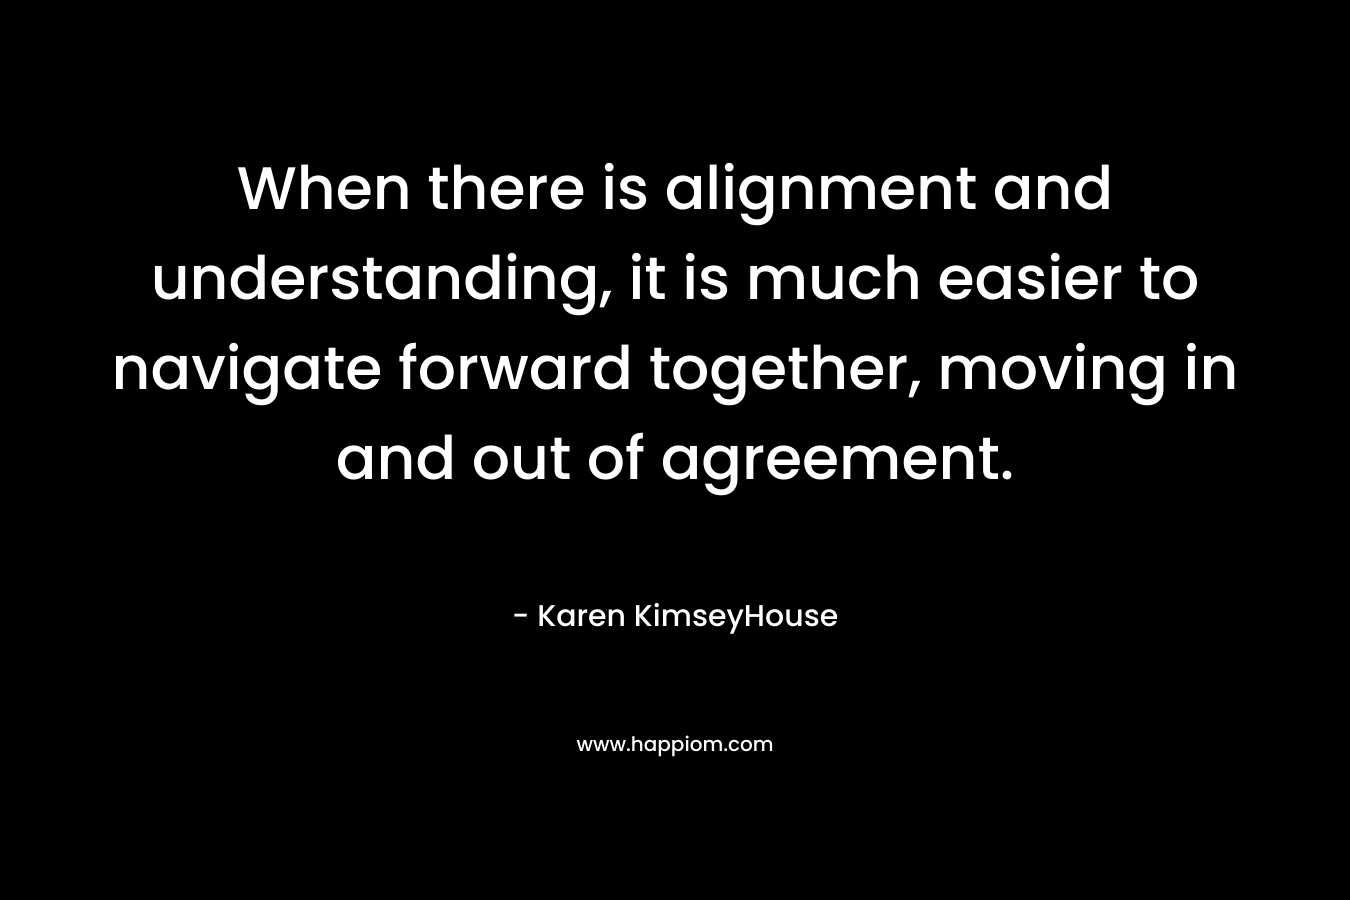 When there is alignment and understanding, it is much easier to navigate forward together, moving in and out of agreement. – Karen KimseyHouse